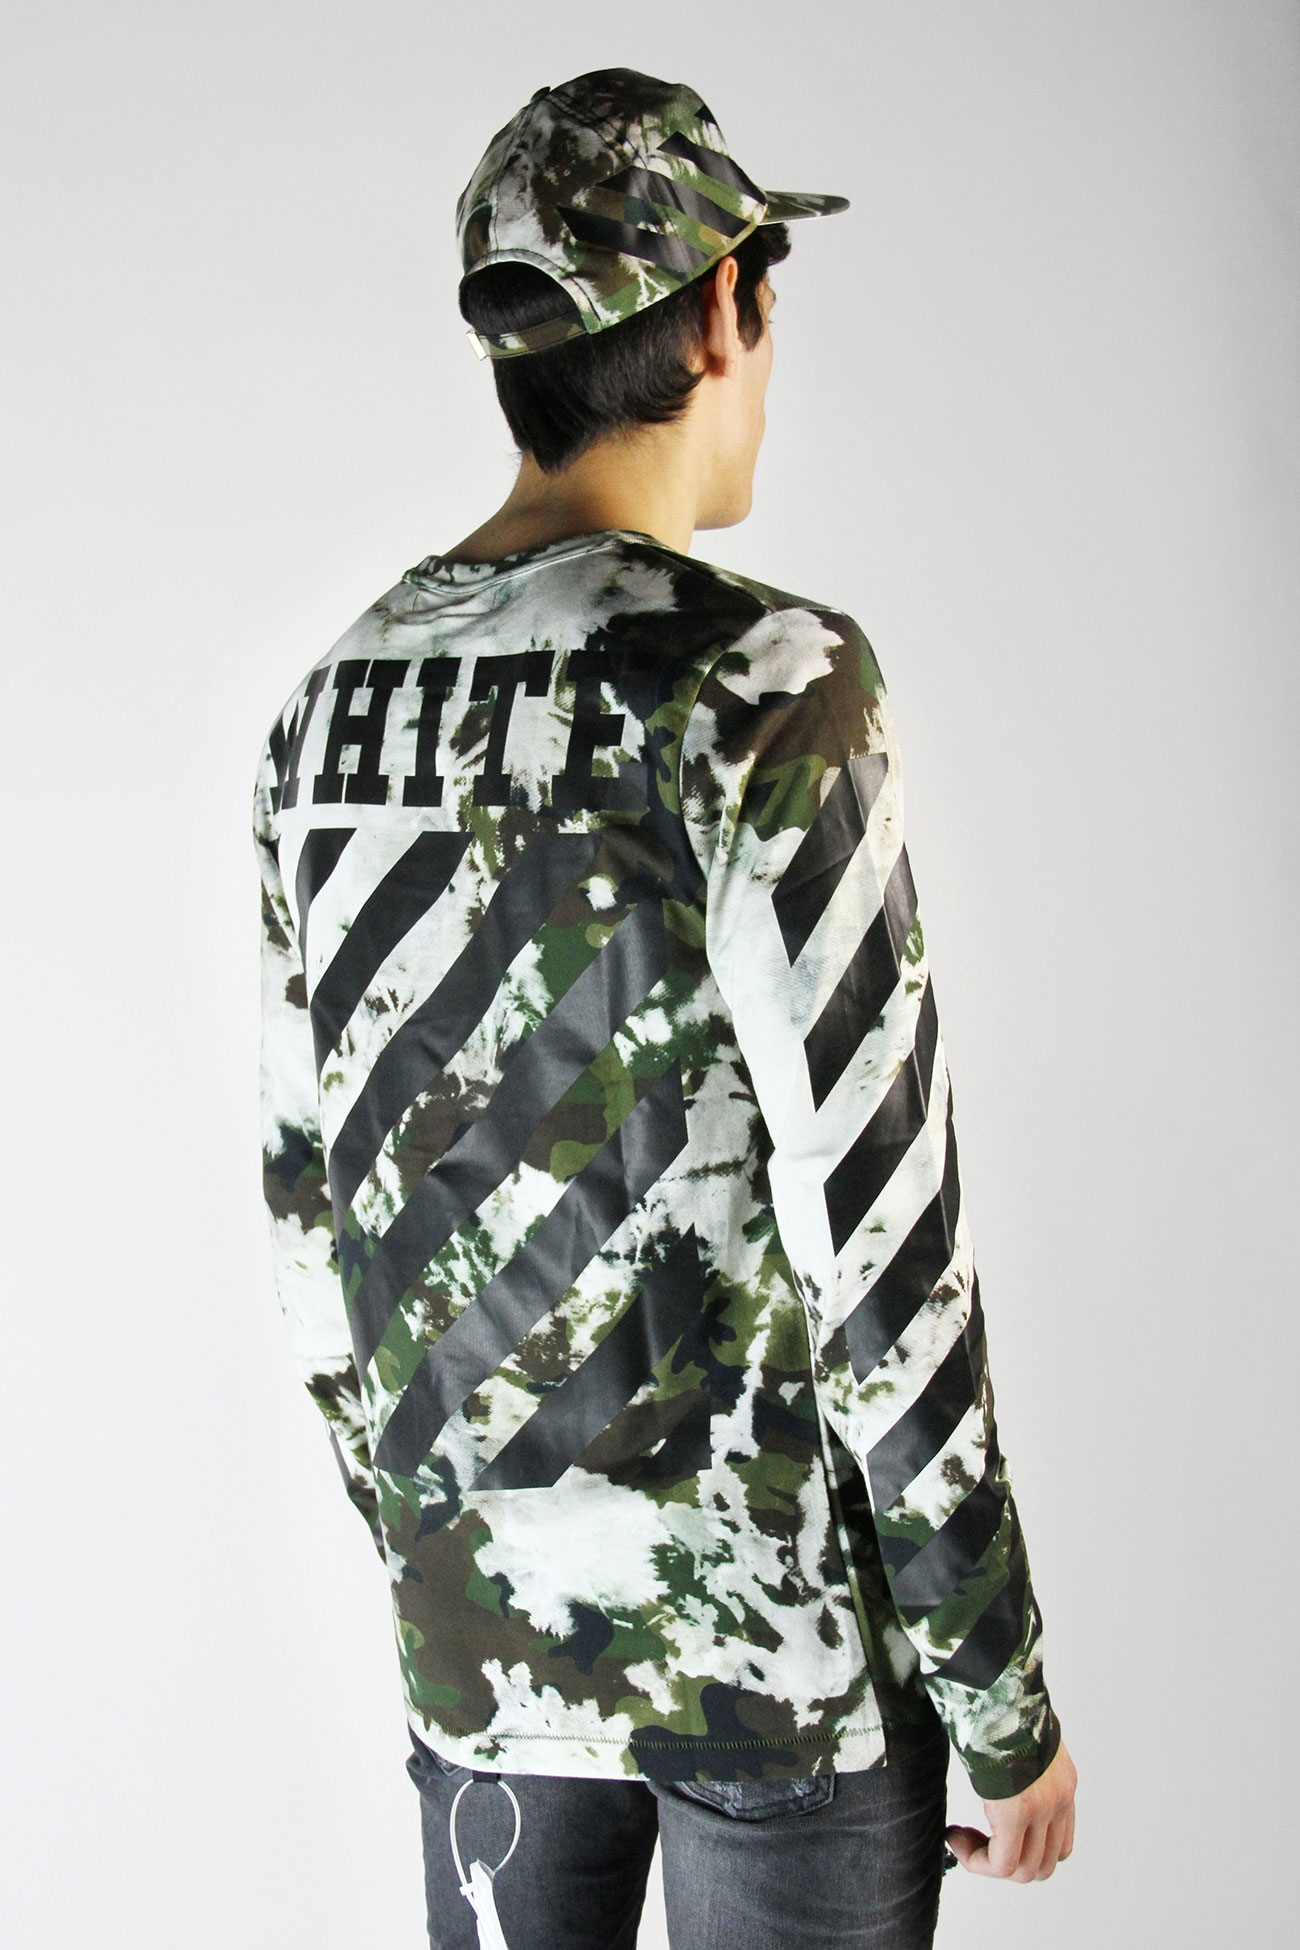 Online used off white camo long sleeve t shirt online